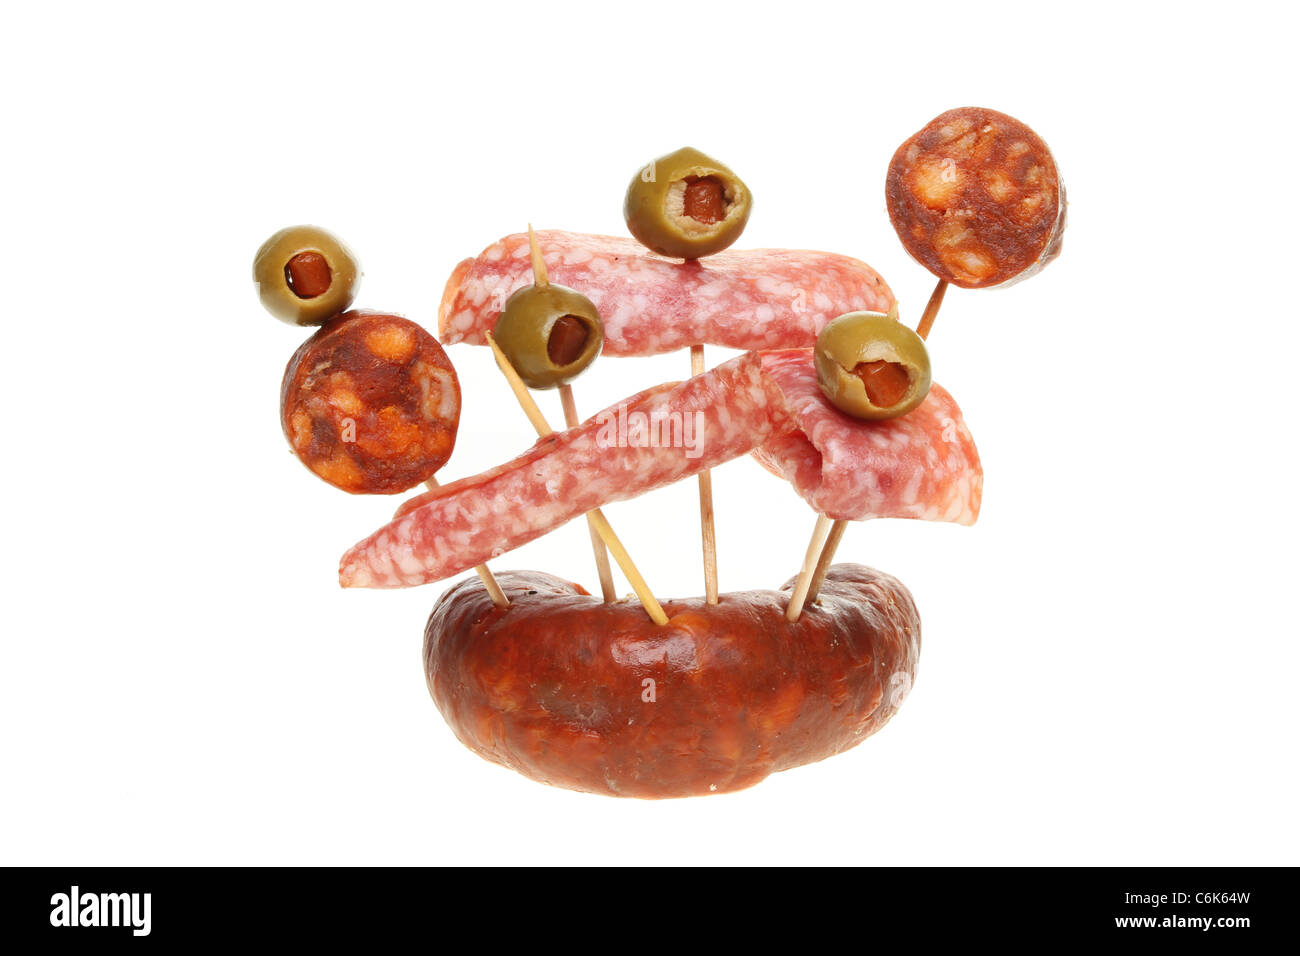 Selection of salami and chorizo sausage meats with olives on cocktail sticks Stock Photo